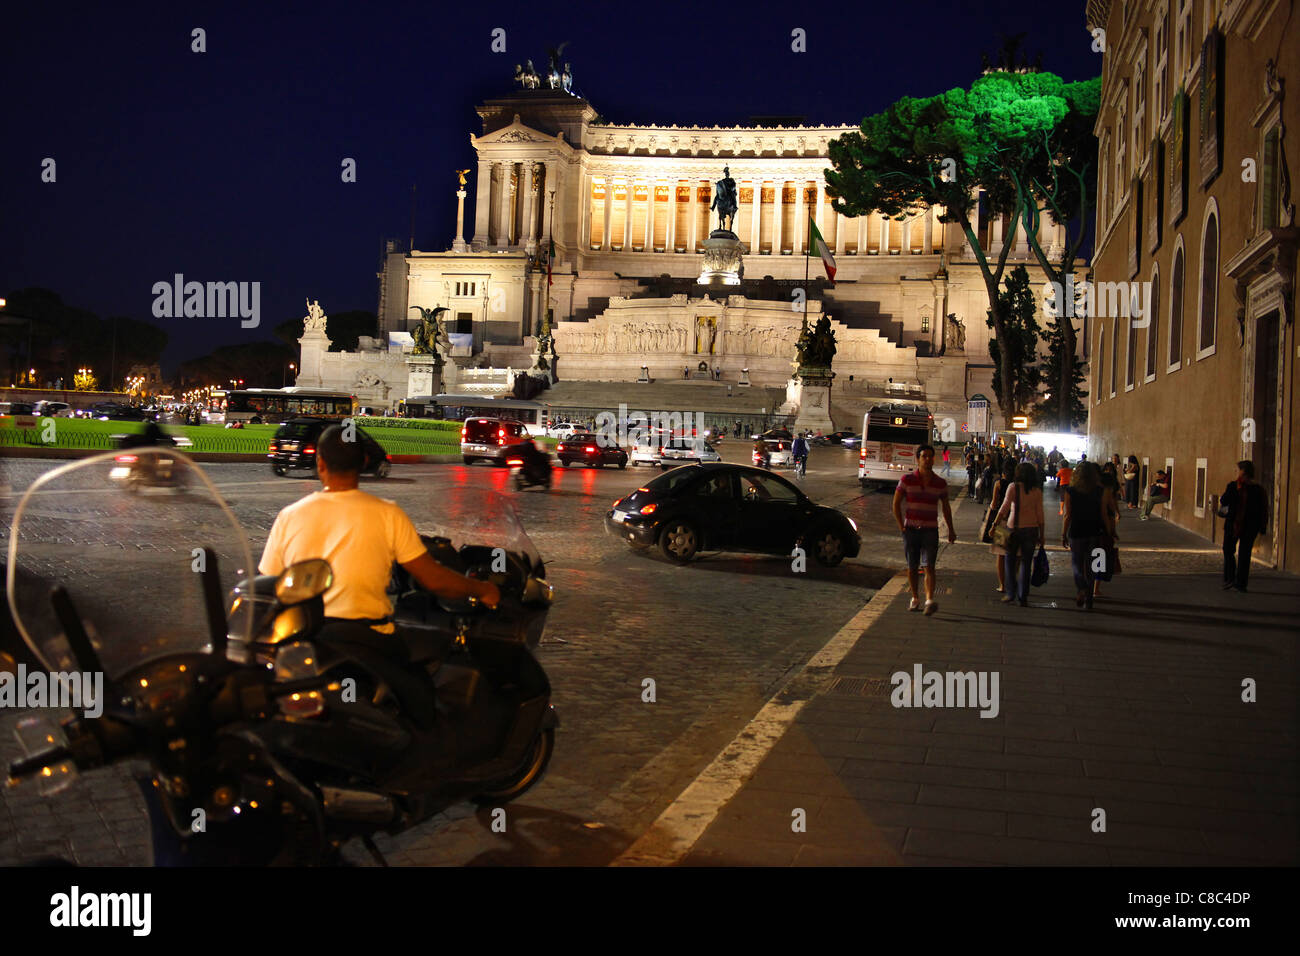 The national memorial to Vittorio Emanuele II in Rome, Italy. Stock Photo